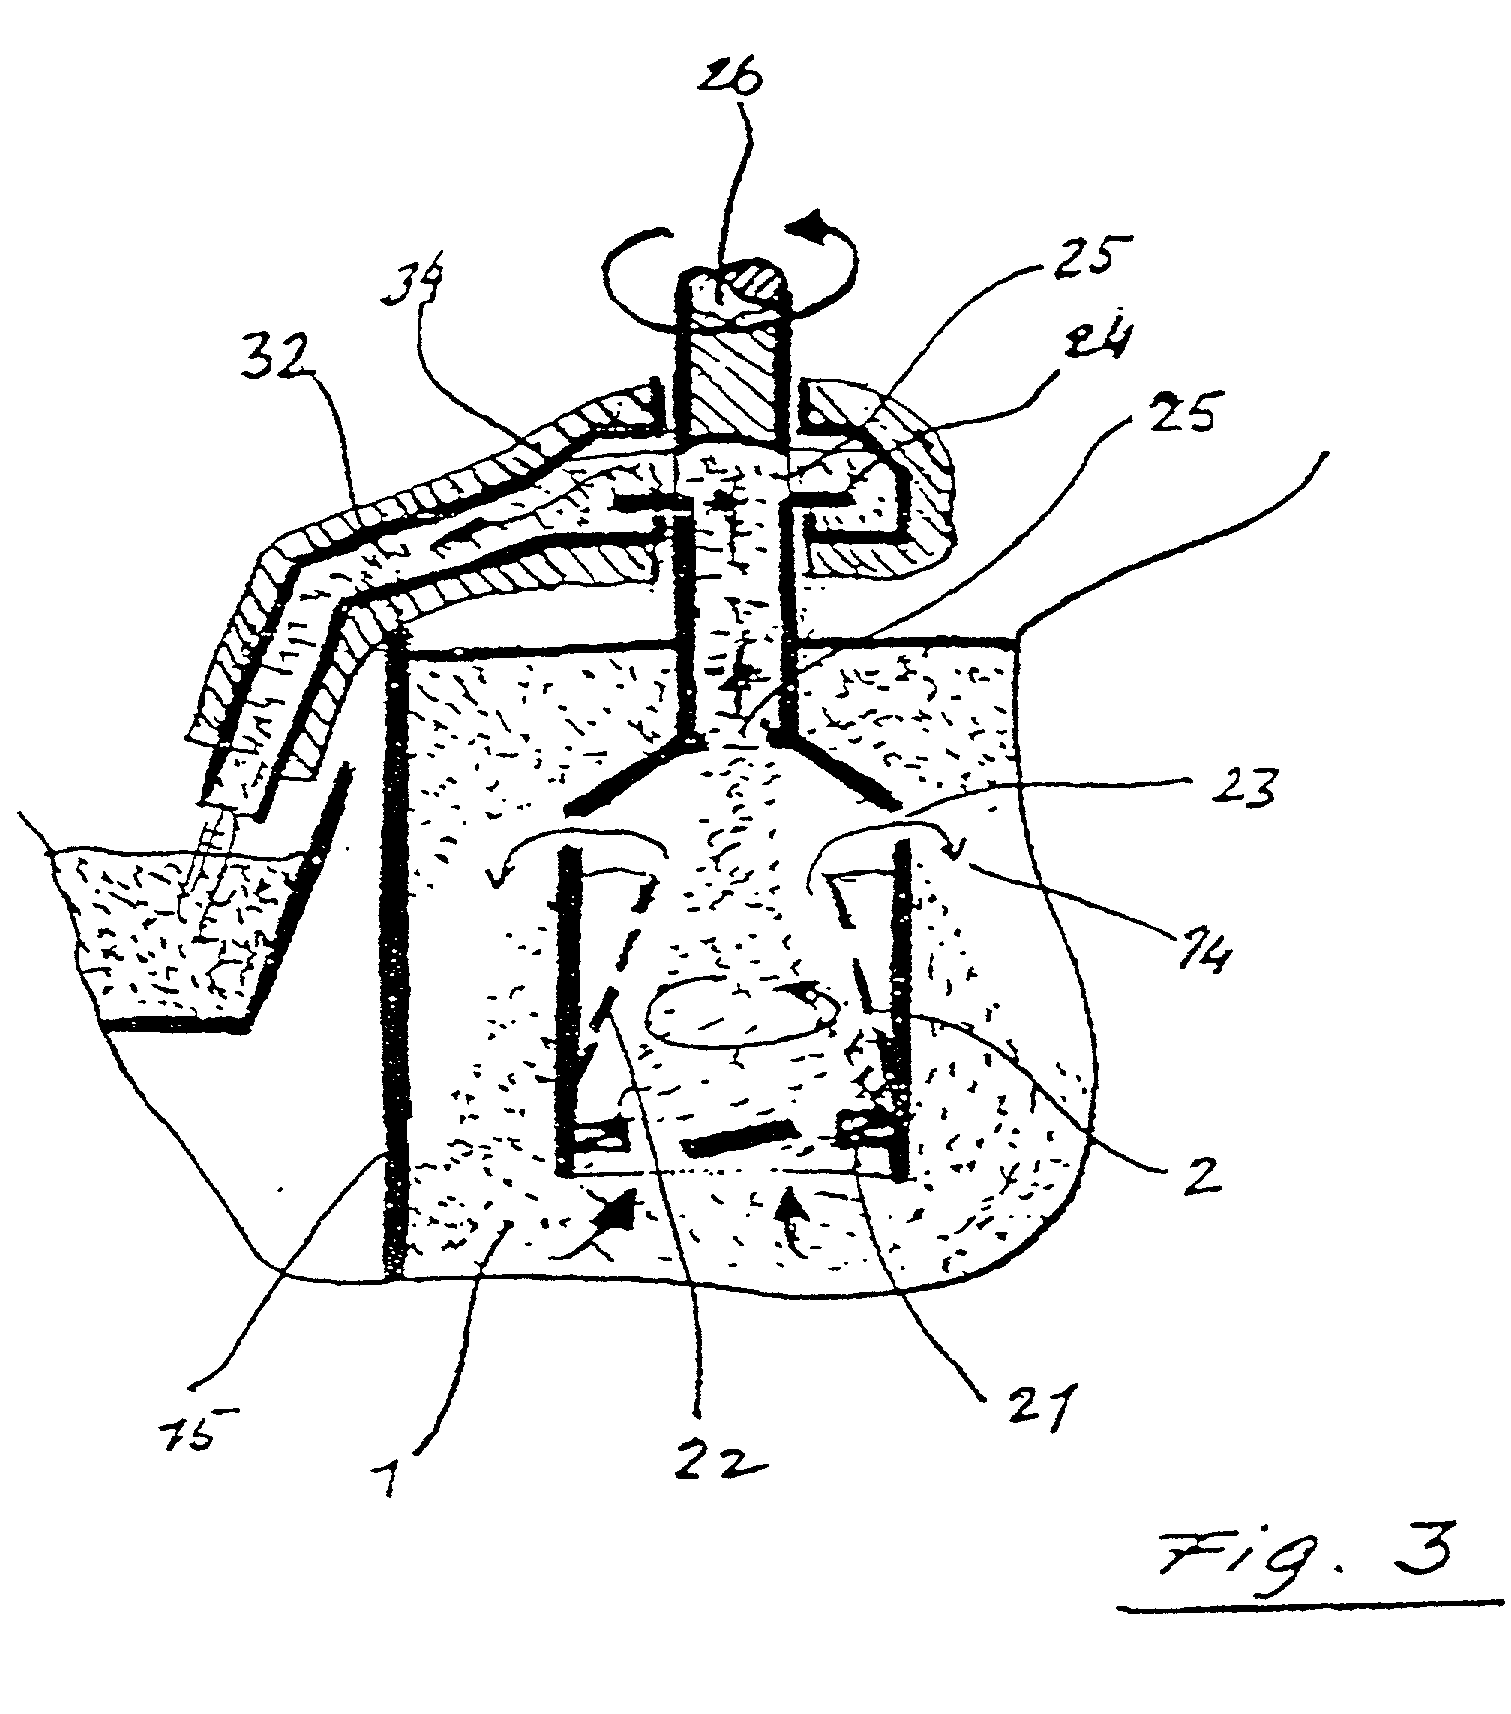 Process and device for precipitating compounds from zinc metal baths by means of a hollow rotary body that can be driven about an axis and is dipped into the molten zinc